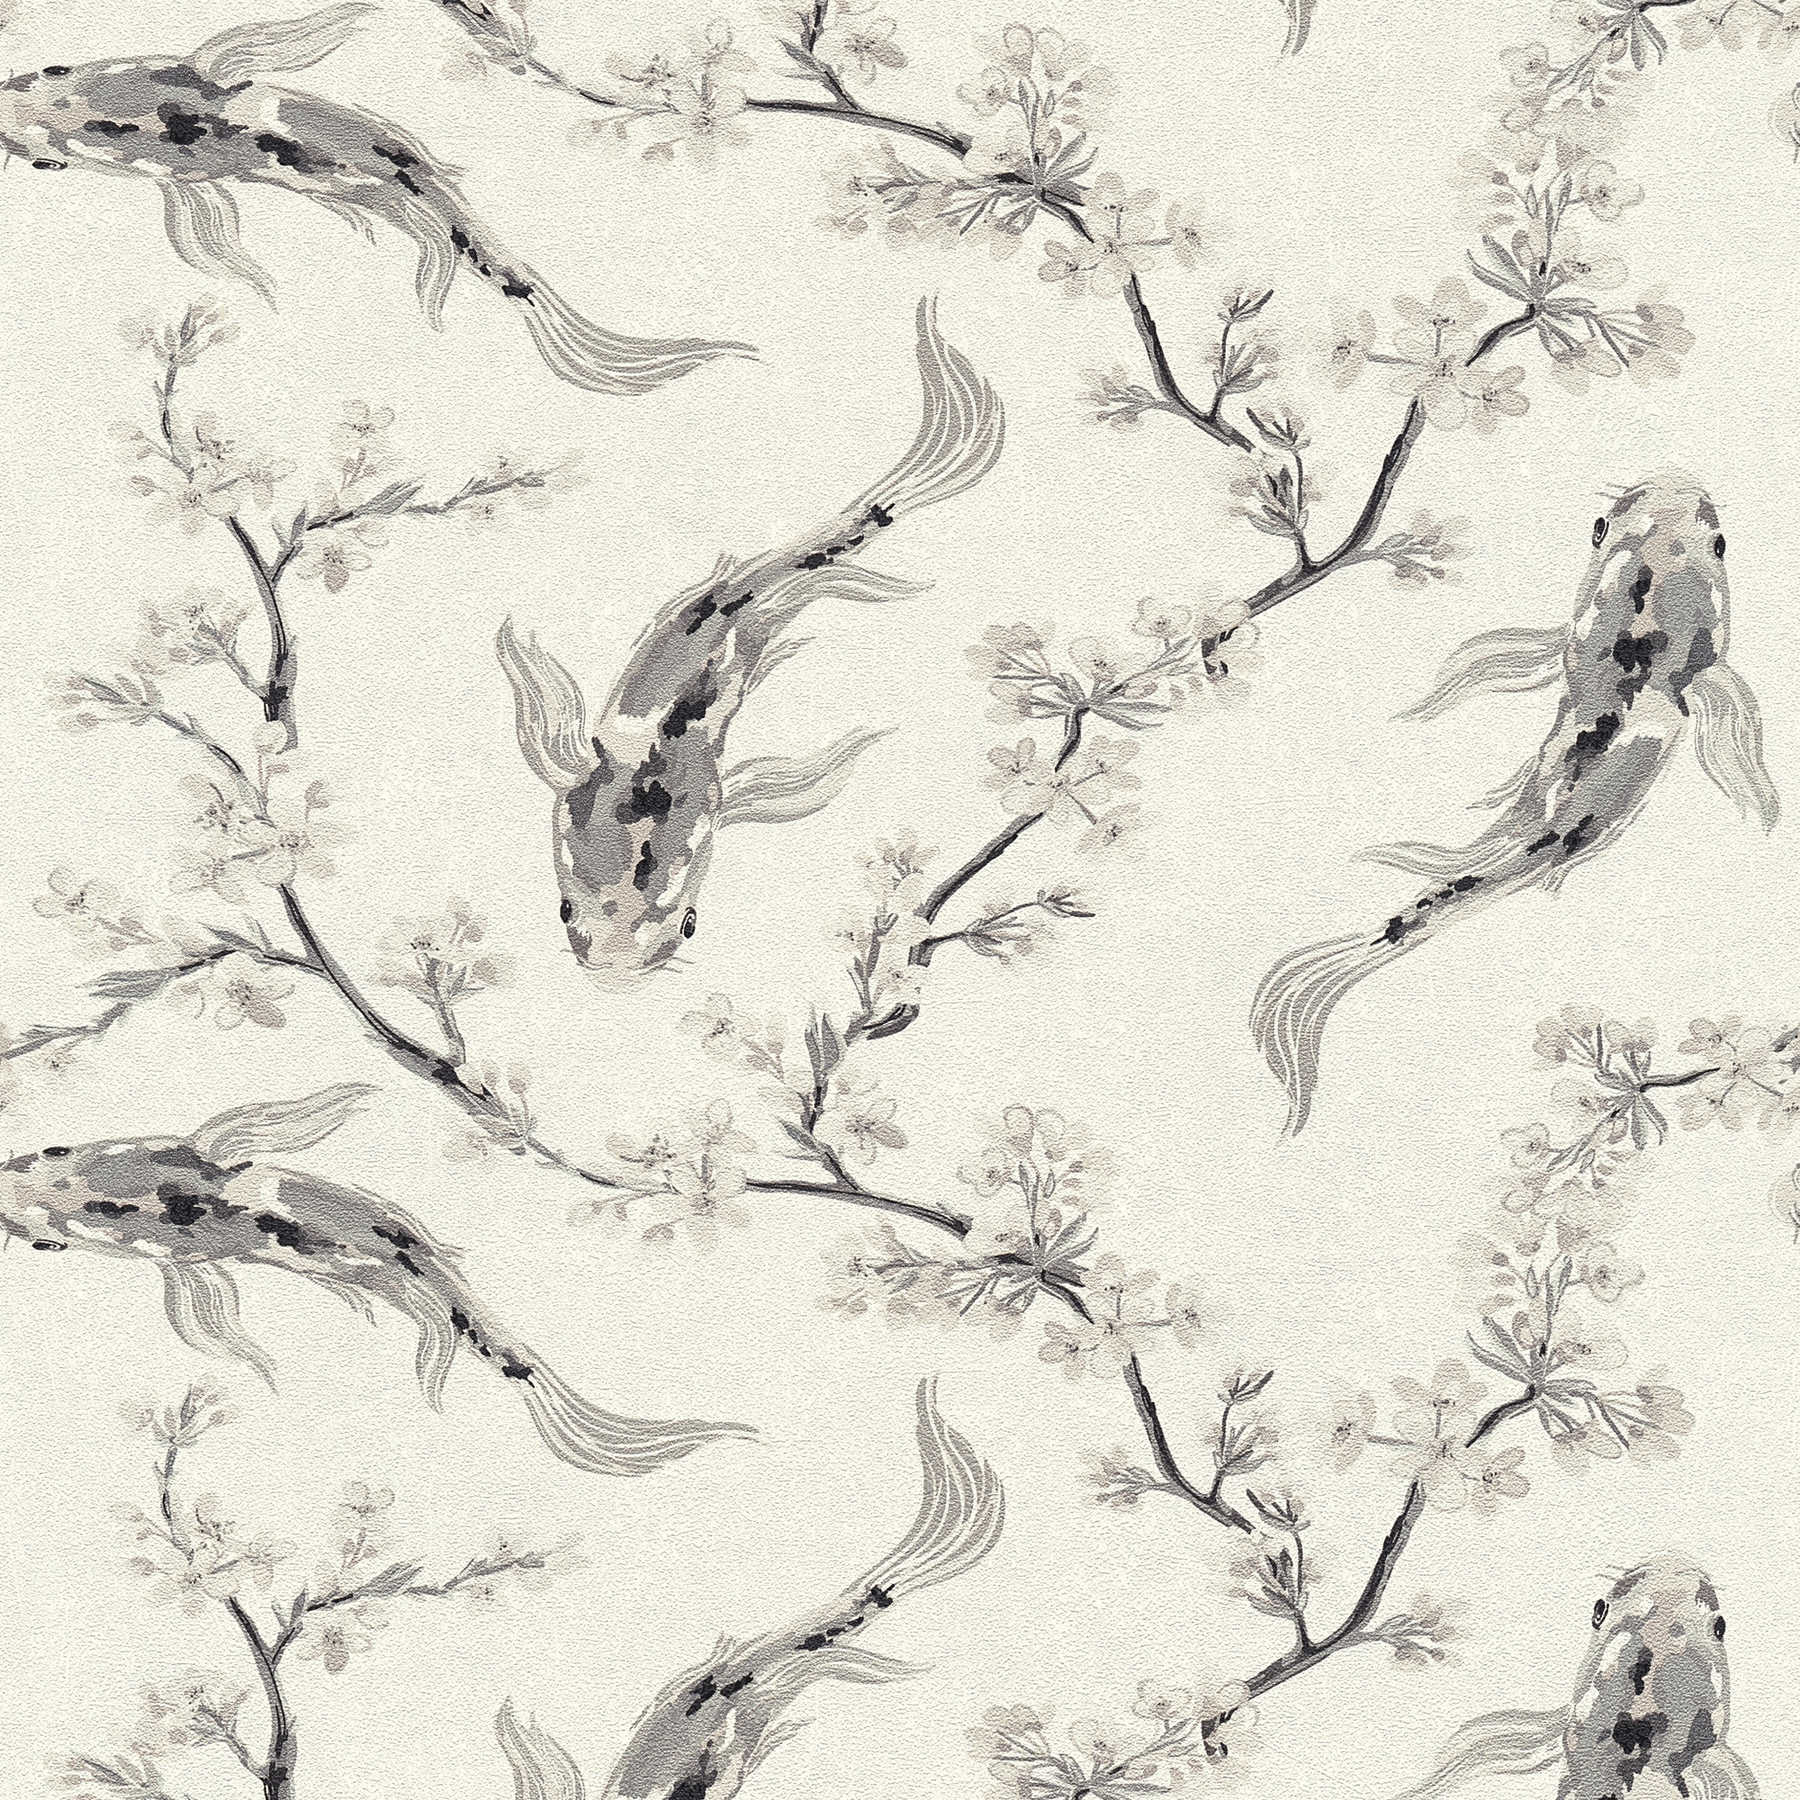         Non-woven wallpaper with koi pattern in Asian style - grey, beige, cream
    